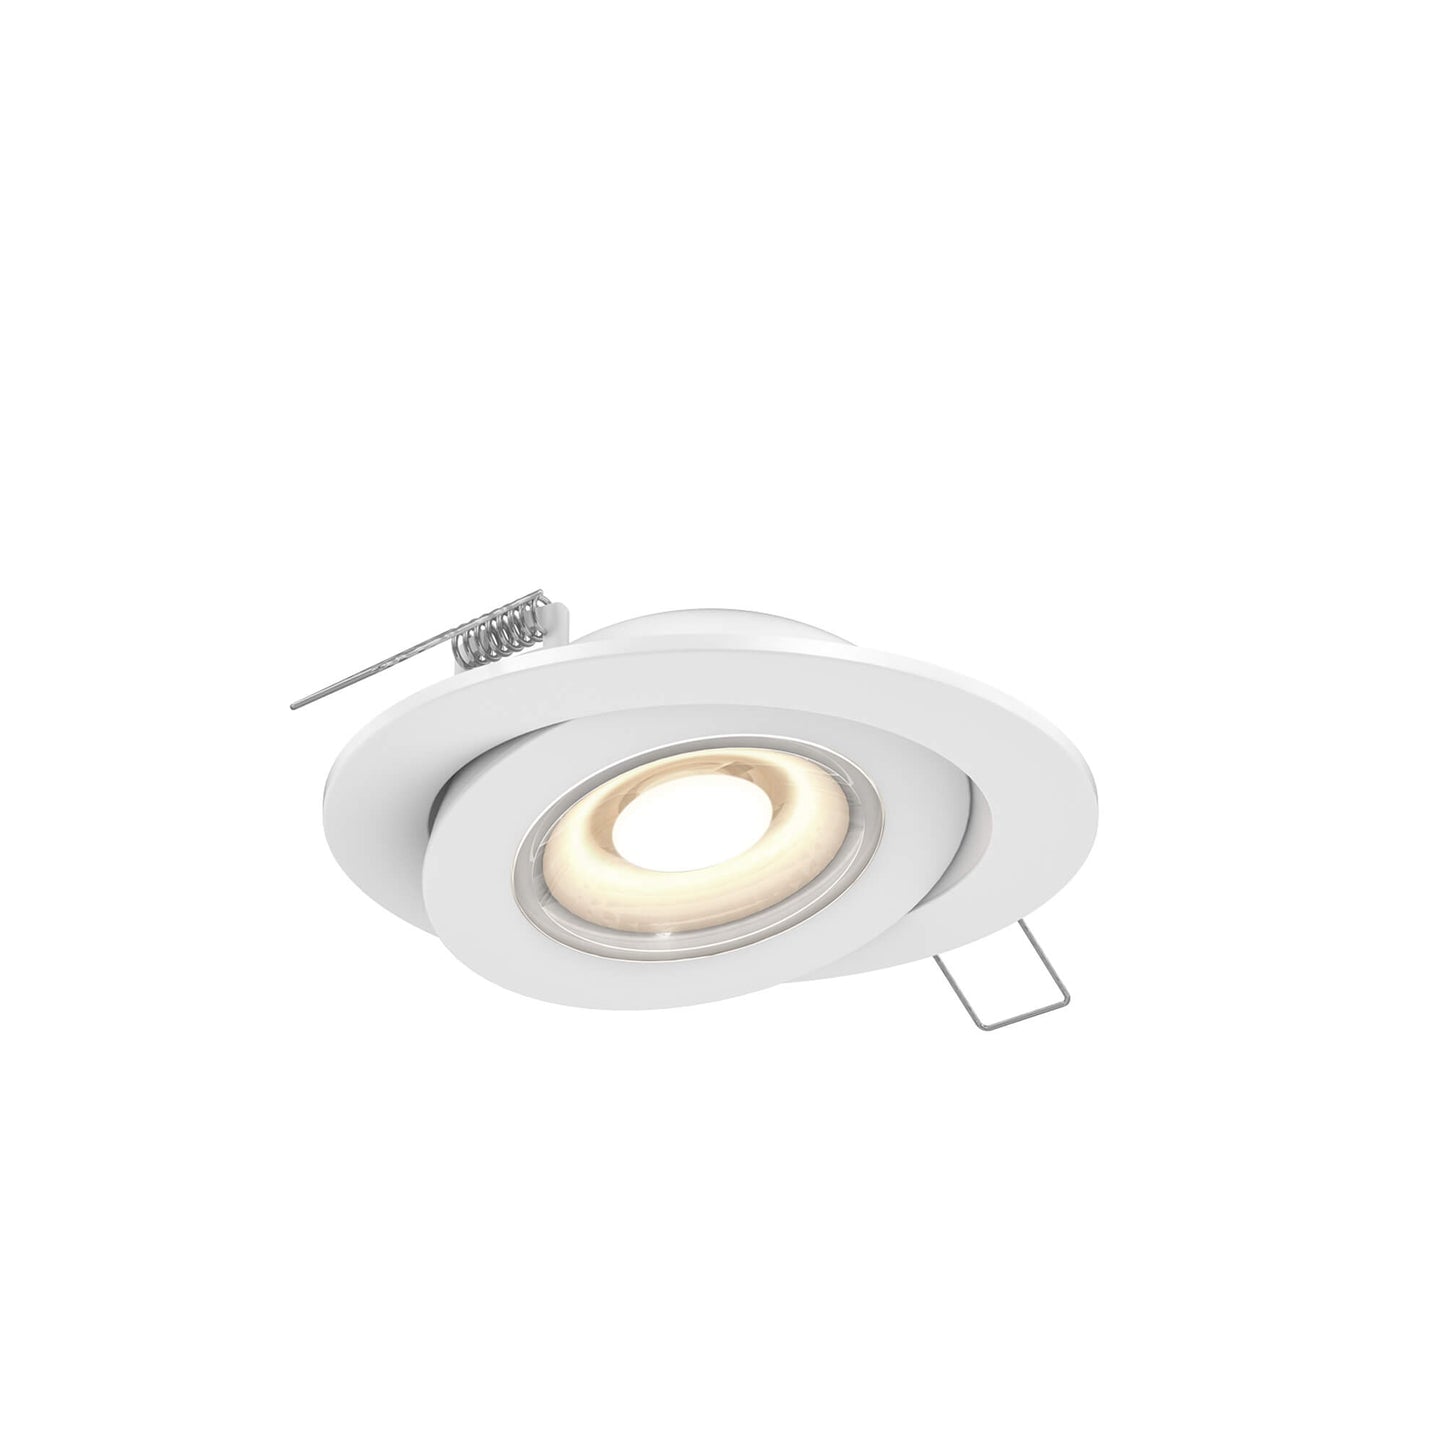 4 Inch Flat Recessed LED Gimbal Light